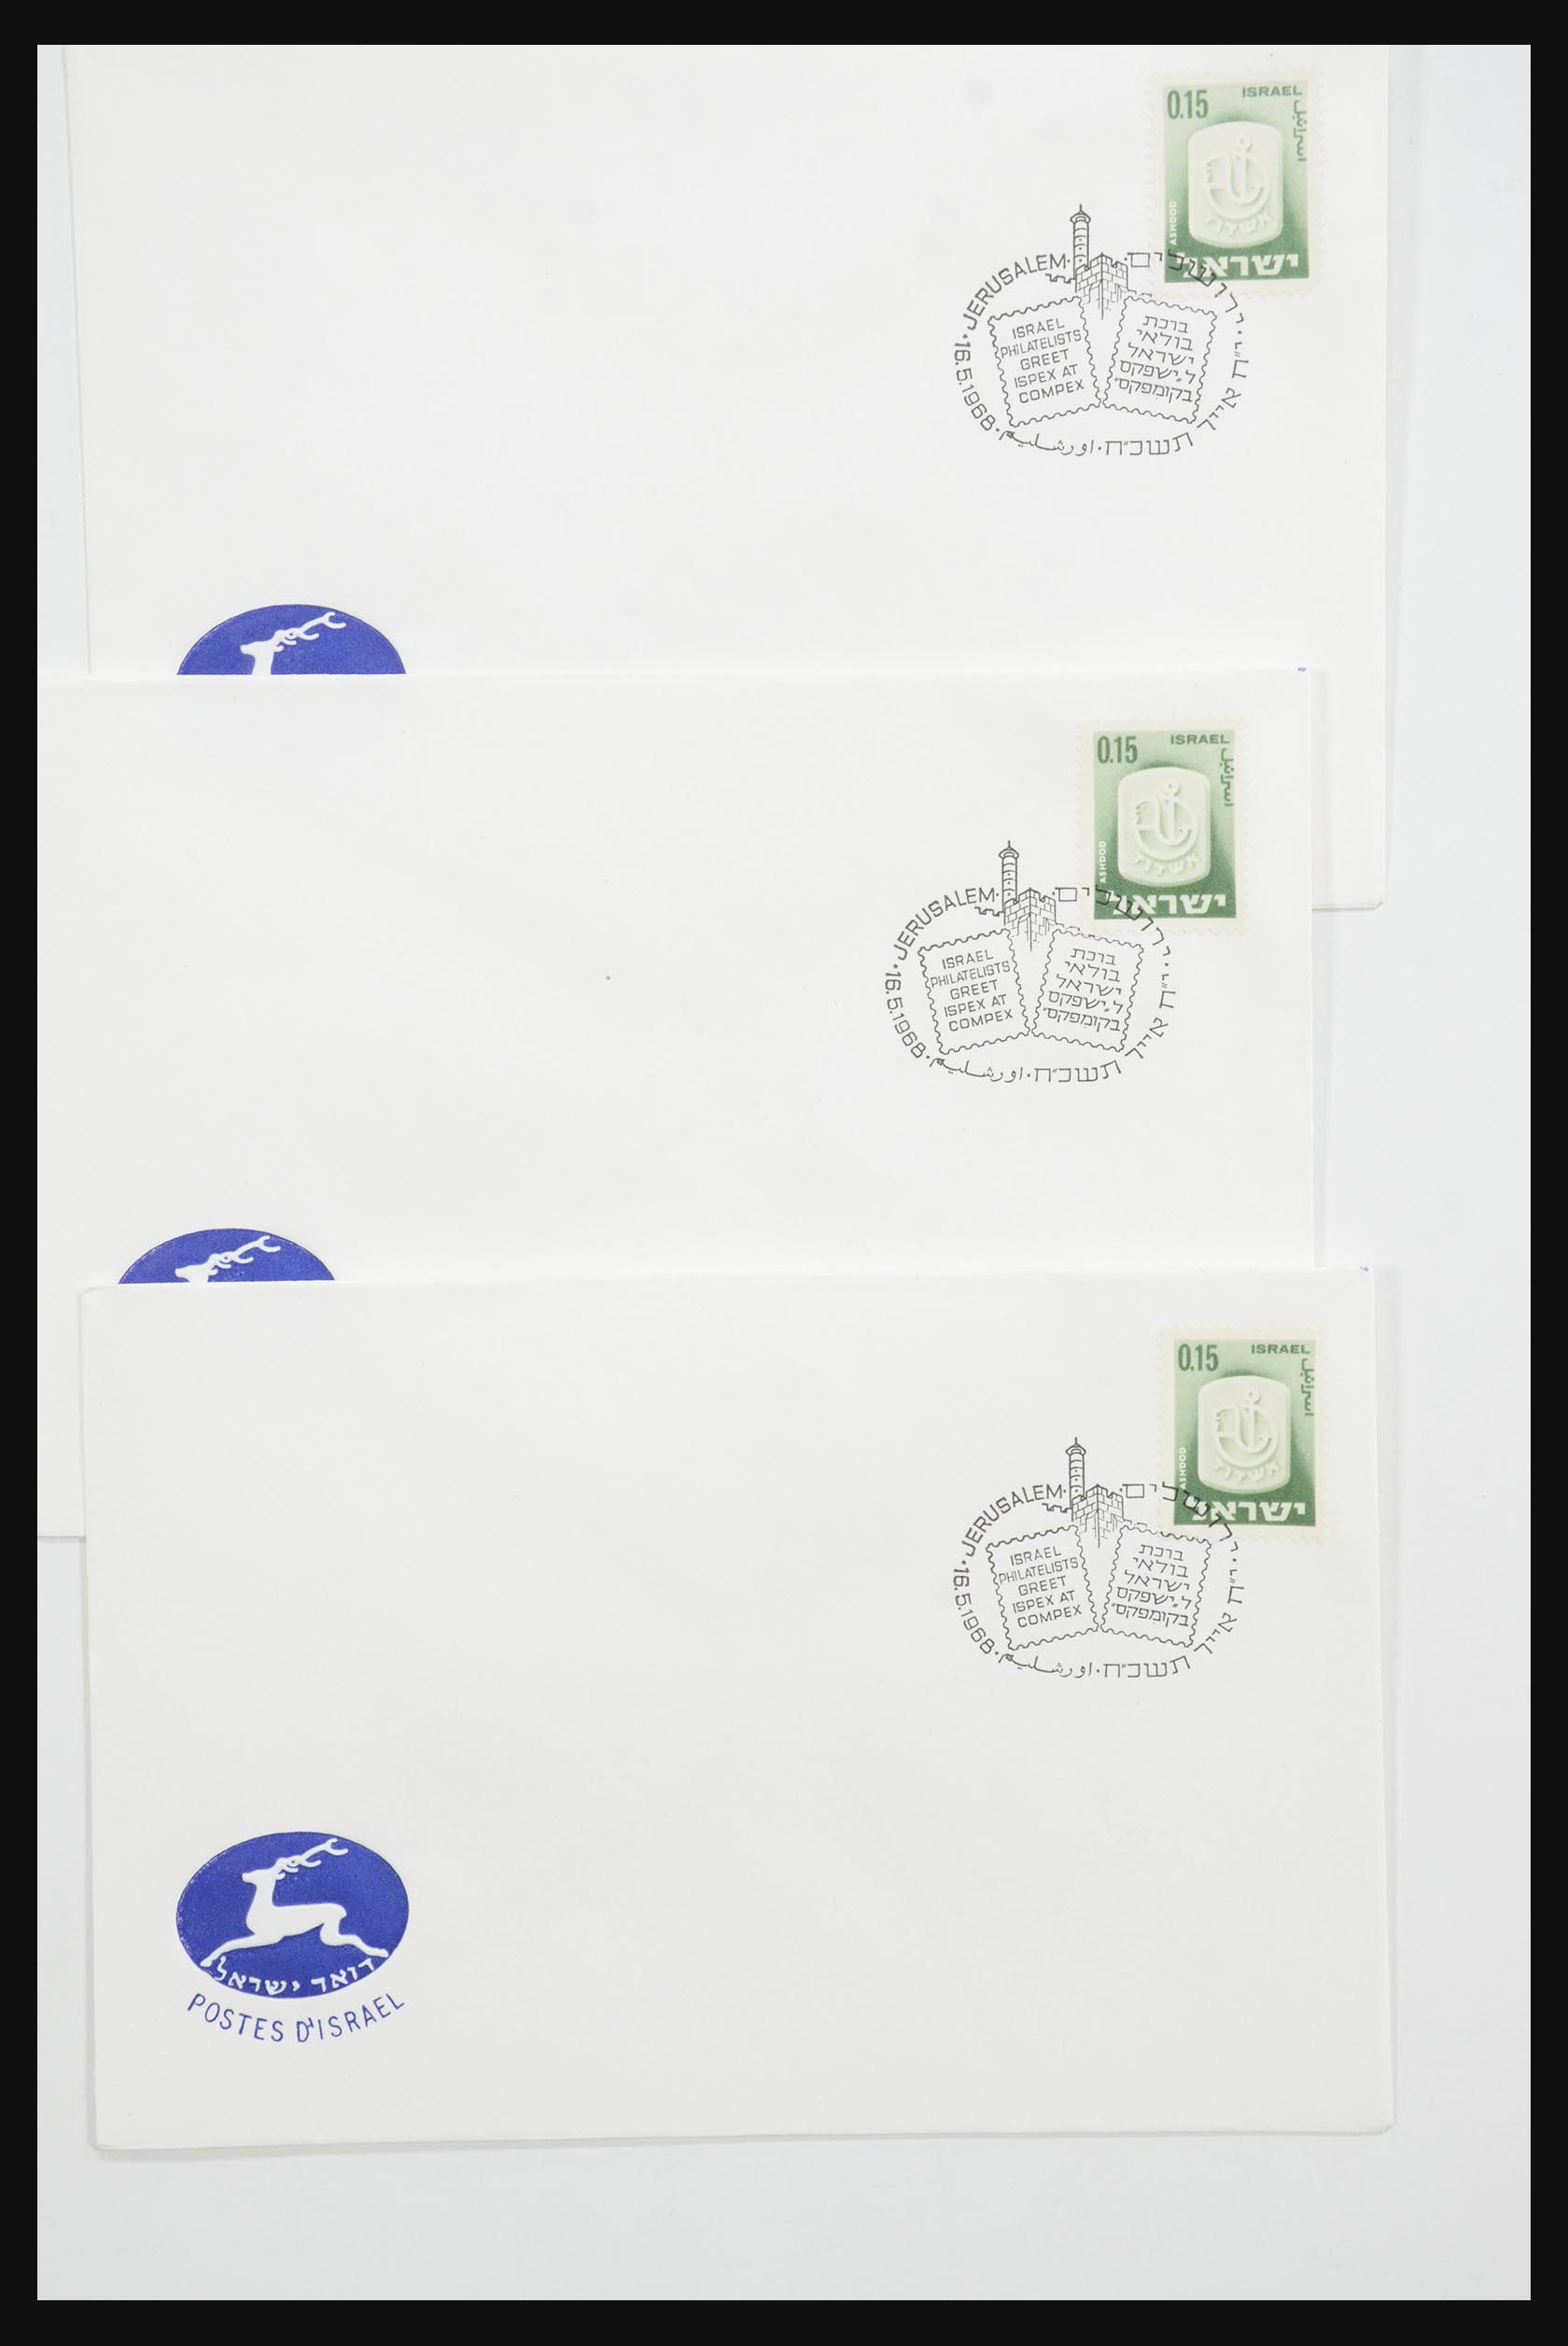 31924 084 - 31924 Israel first day cover collection 1957-2003.